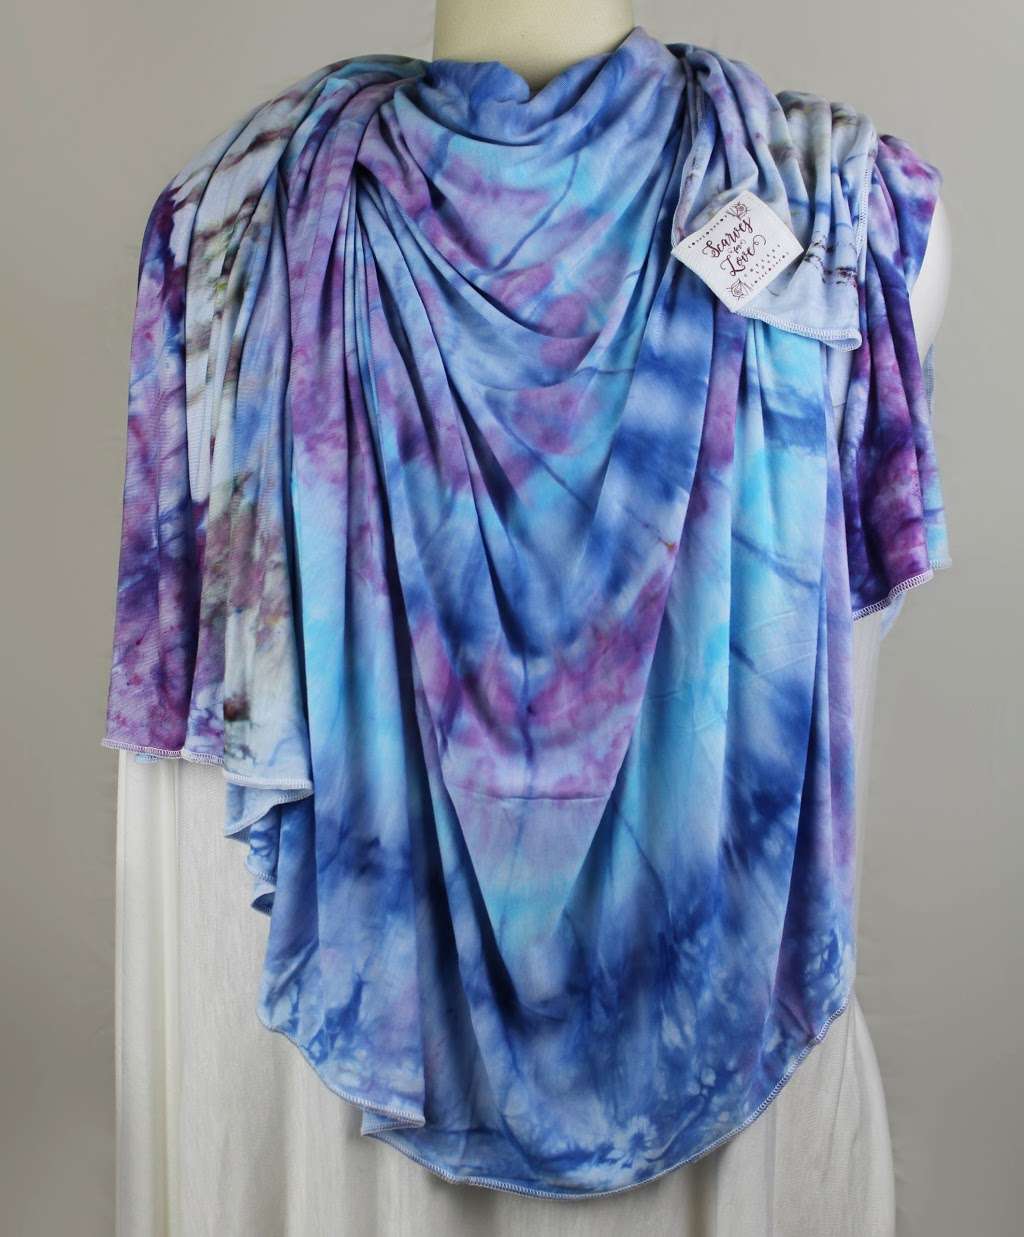 Scarves for Love | 7360 Curry Ford Rd #720301, Orlando, FL 32872